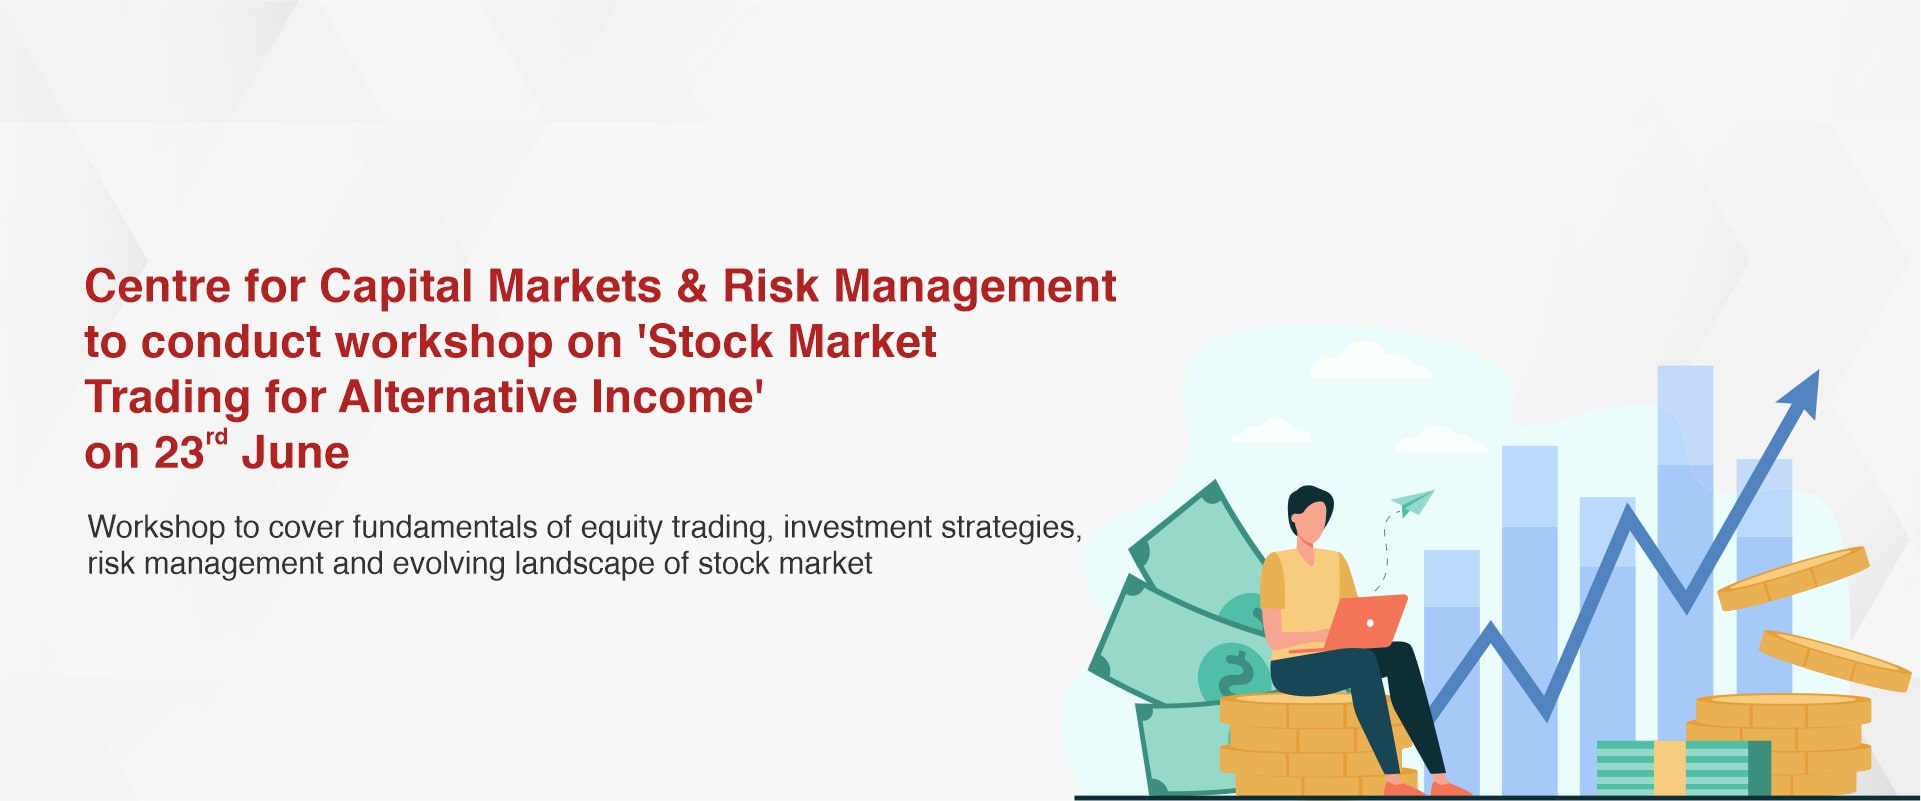 Centre for Capital Markets & Risk Management to conduct workshop on ‘Stock Market Trading for Alternative Income’ on 23rd June